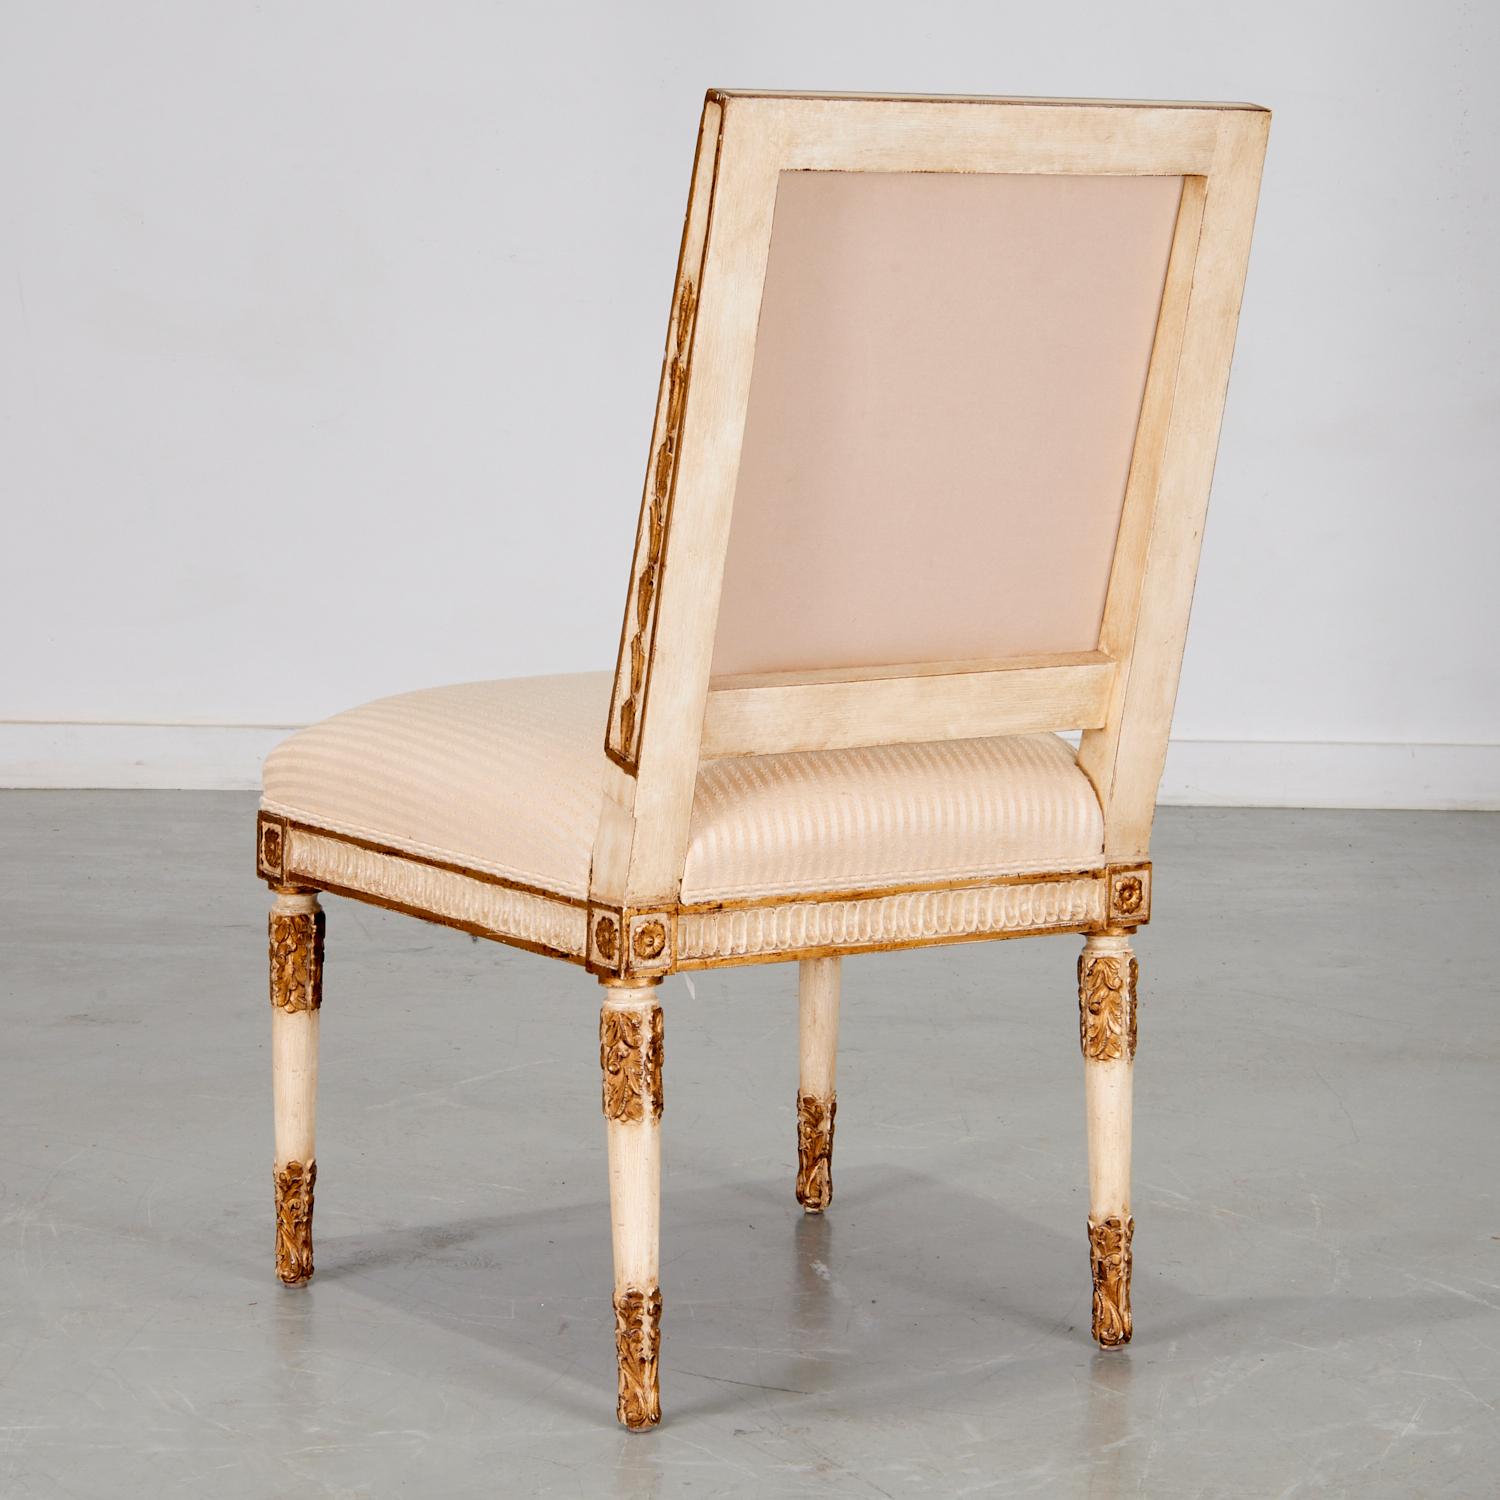 20th Century Italian Neoclassical Style Slipper Chair with Cream and Gold Painted Accents For Sale